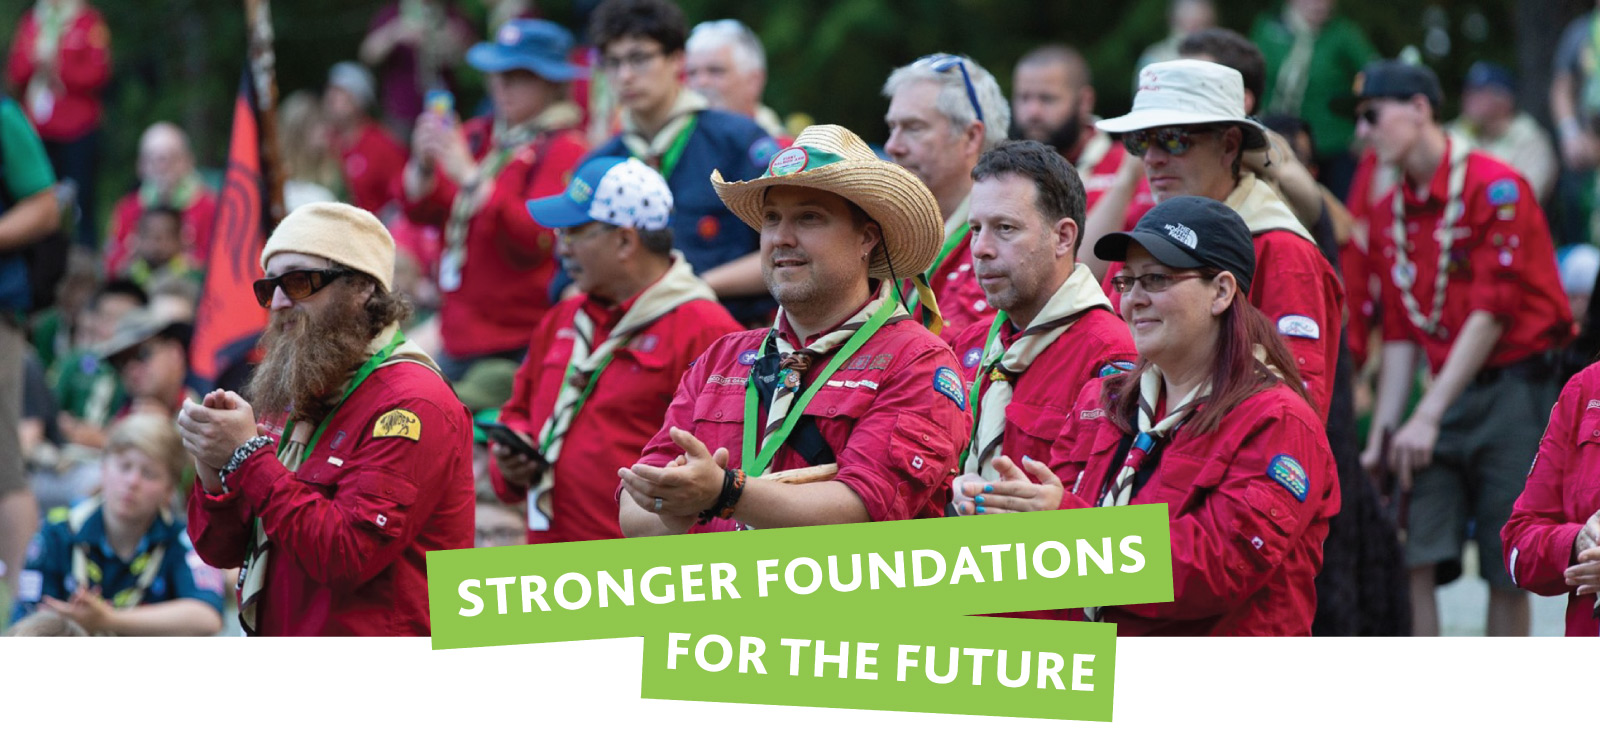 Stronger Foundations for the Future